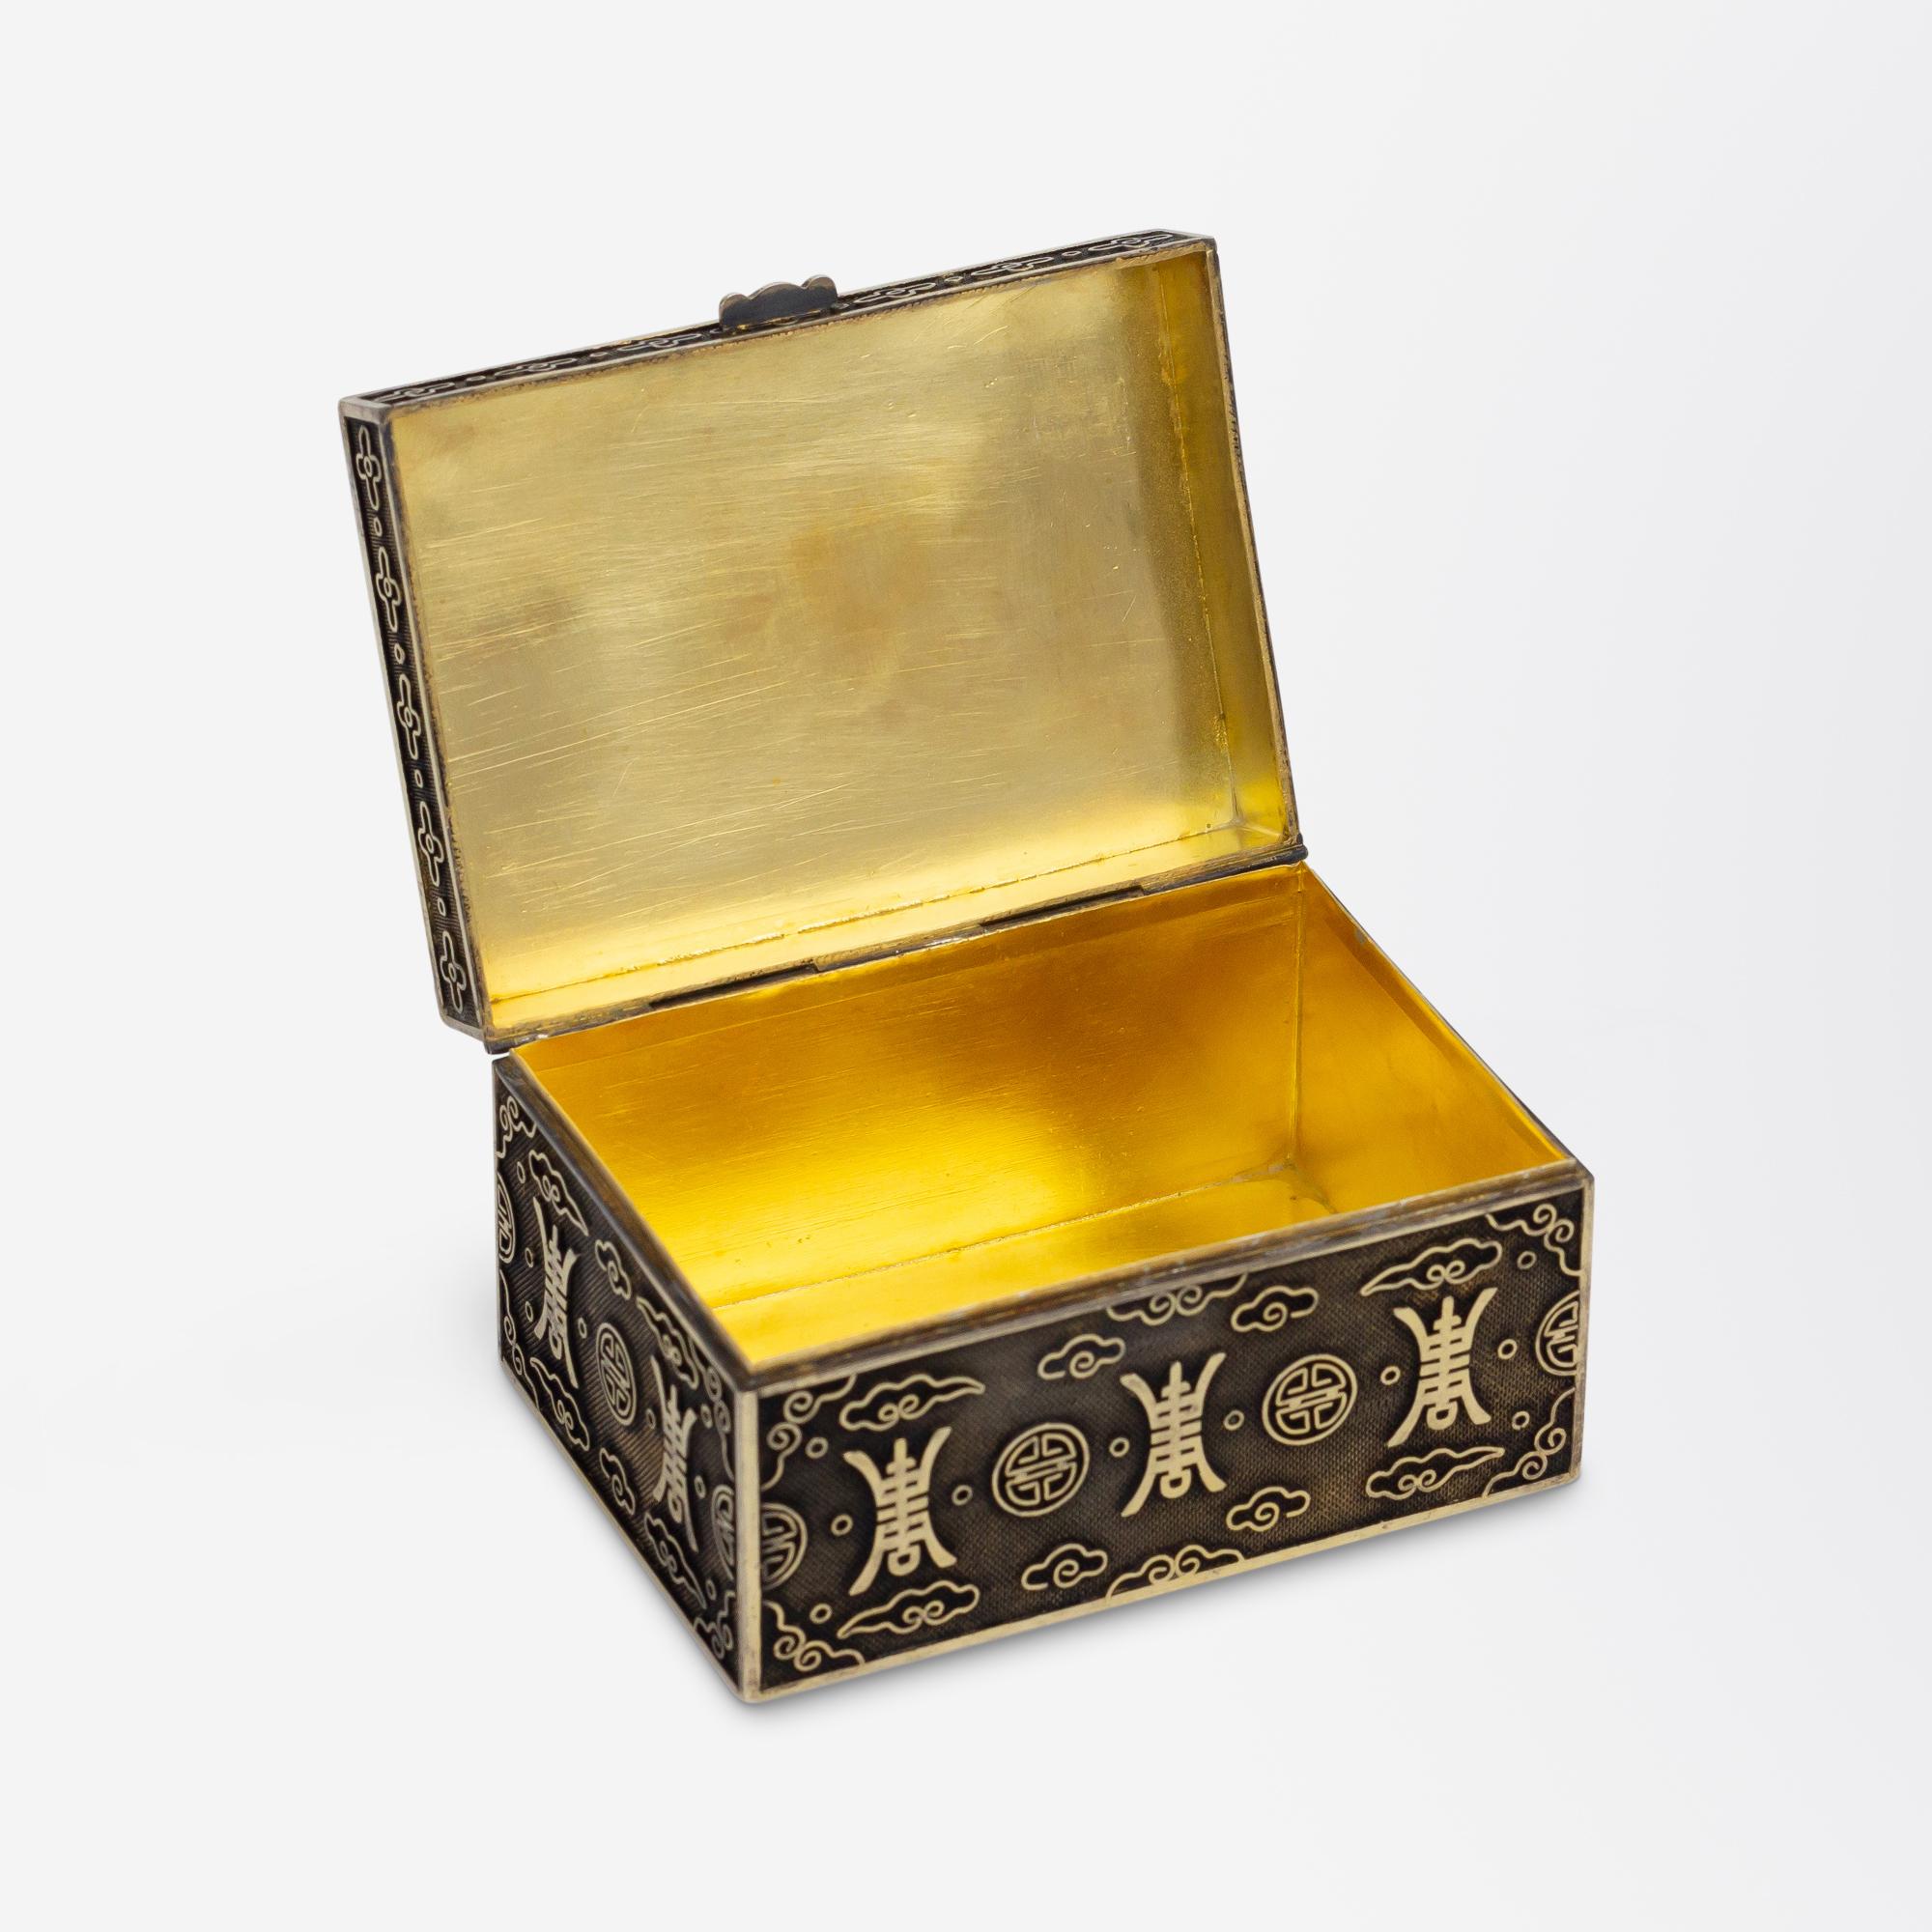 This small silver box was crafted in China and has been inset with a carved jade plaque to the lid. The rectangular box is simply marked 'silver' and is decorated to the exterior with auspicious symbols and cloud motifs which are in relief allowing